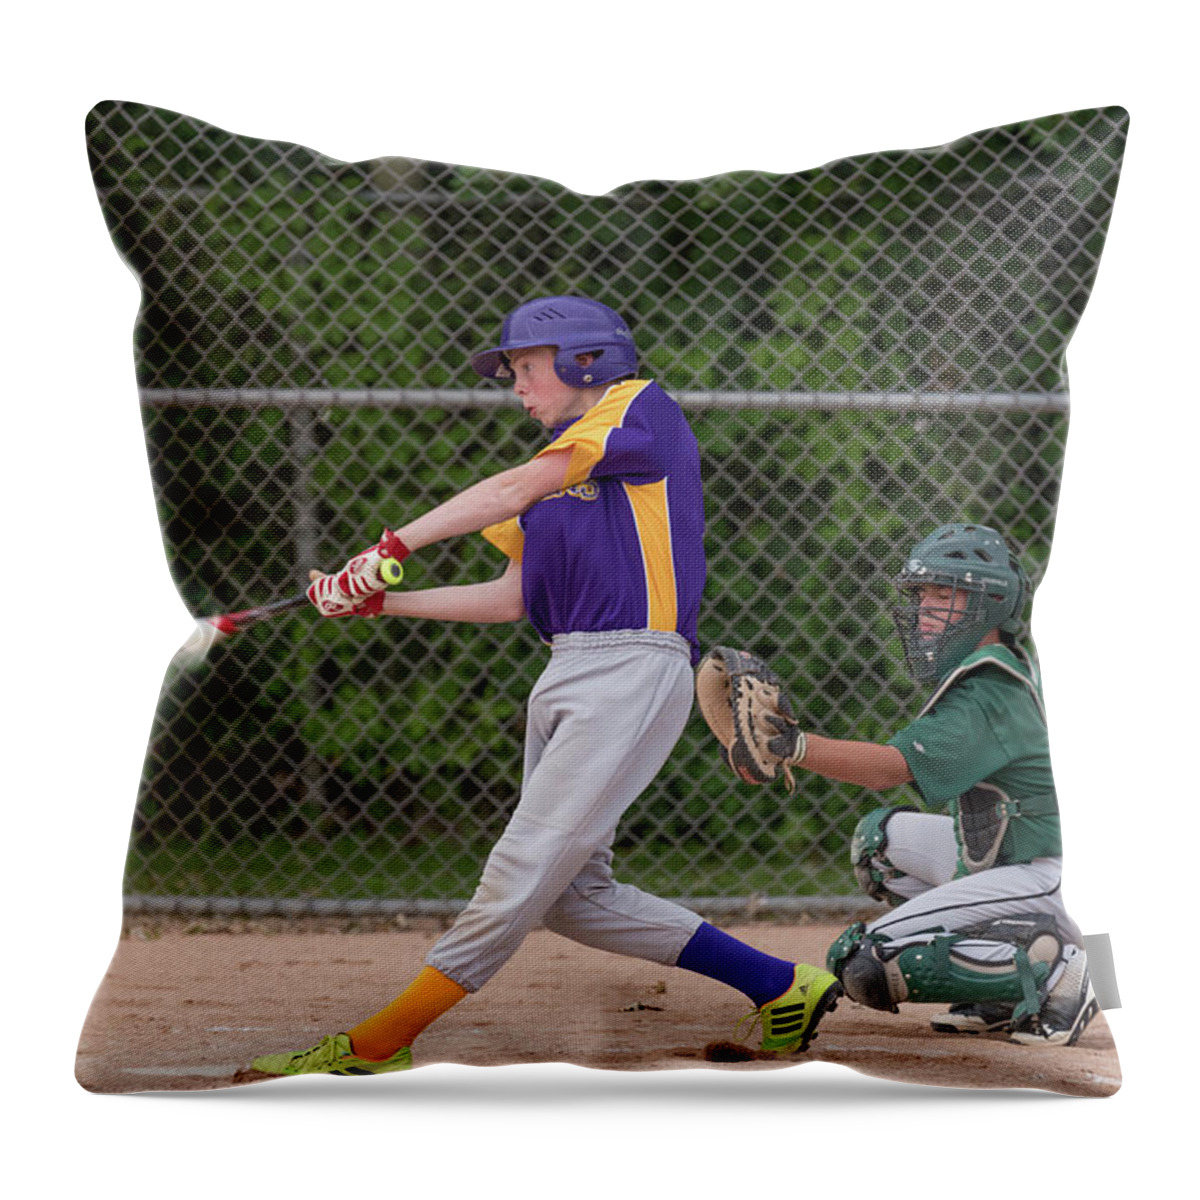  Throw Pillow featuring the photograph Catching II by James Meyer